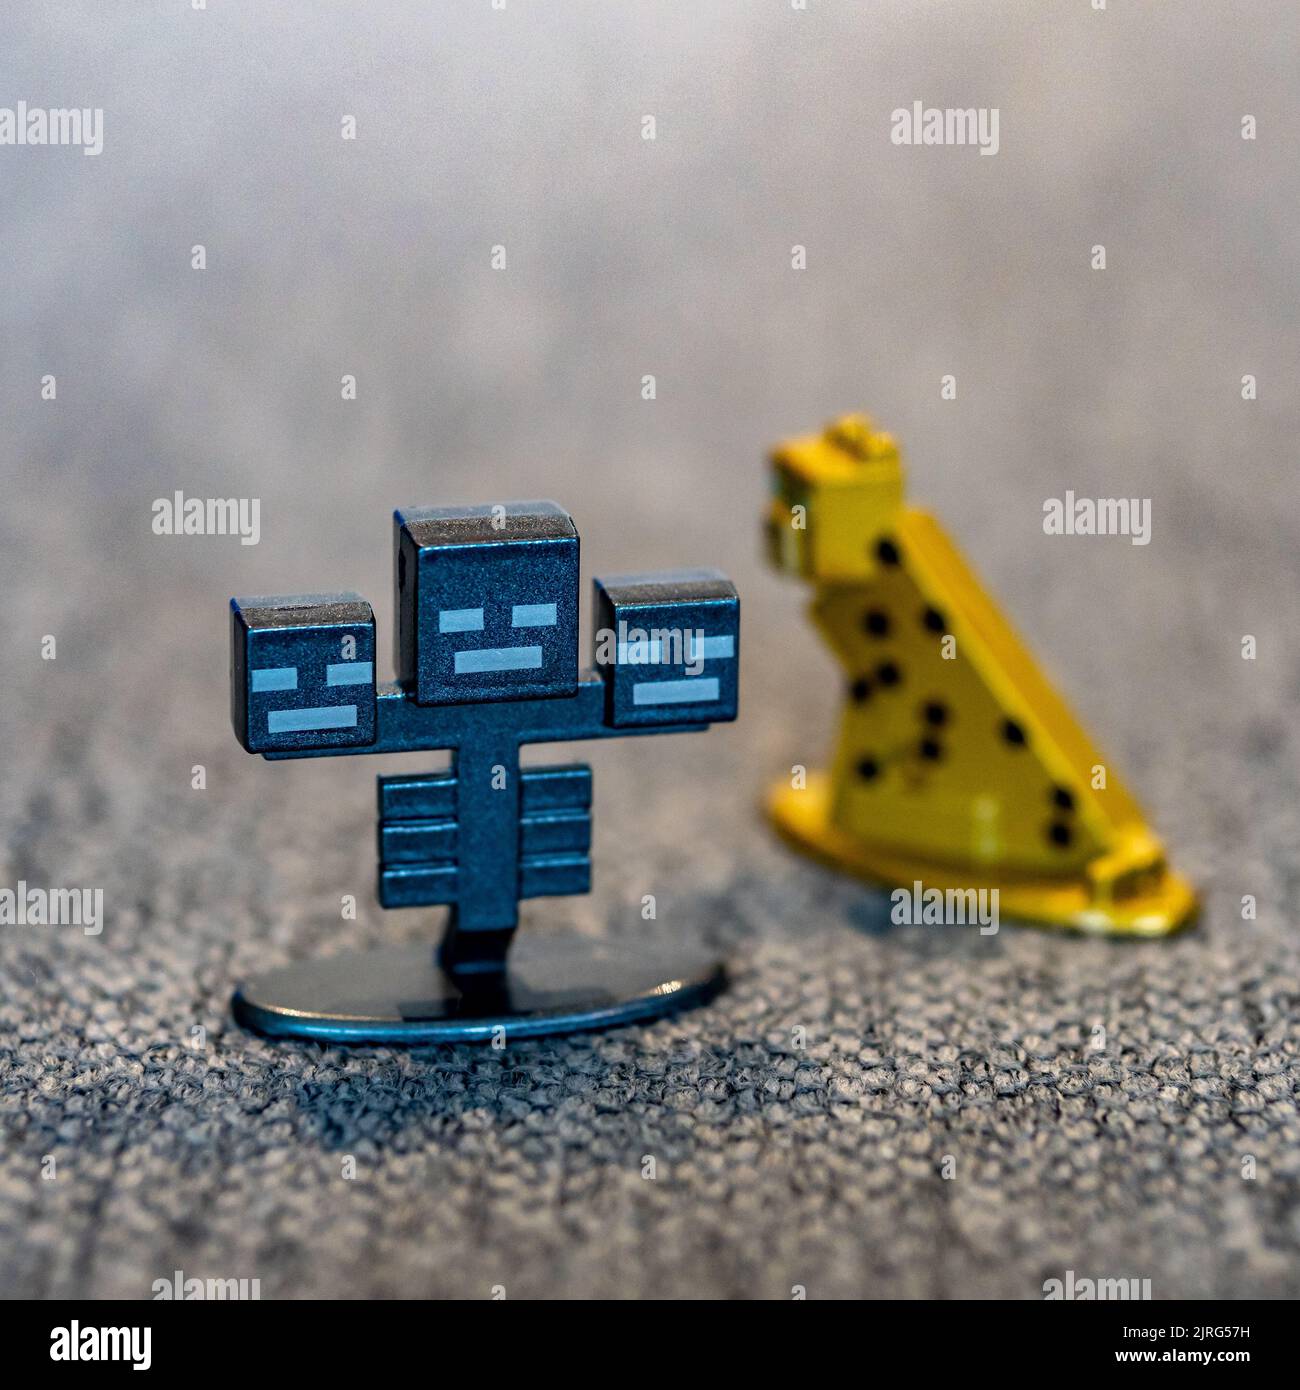 A closeup shot of a Minecraft Wither monster toy figurine made of metal Stock Photo